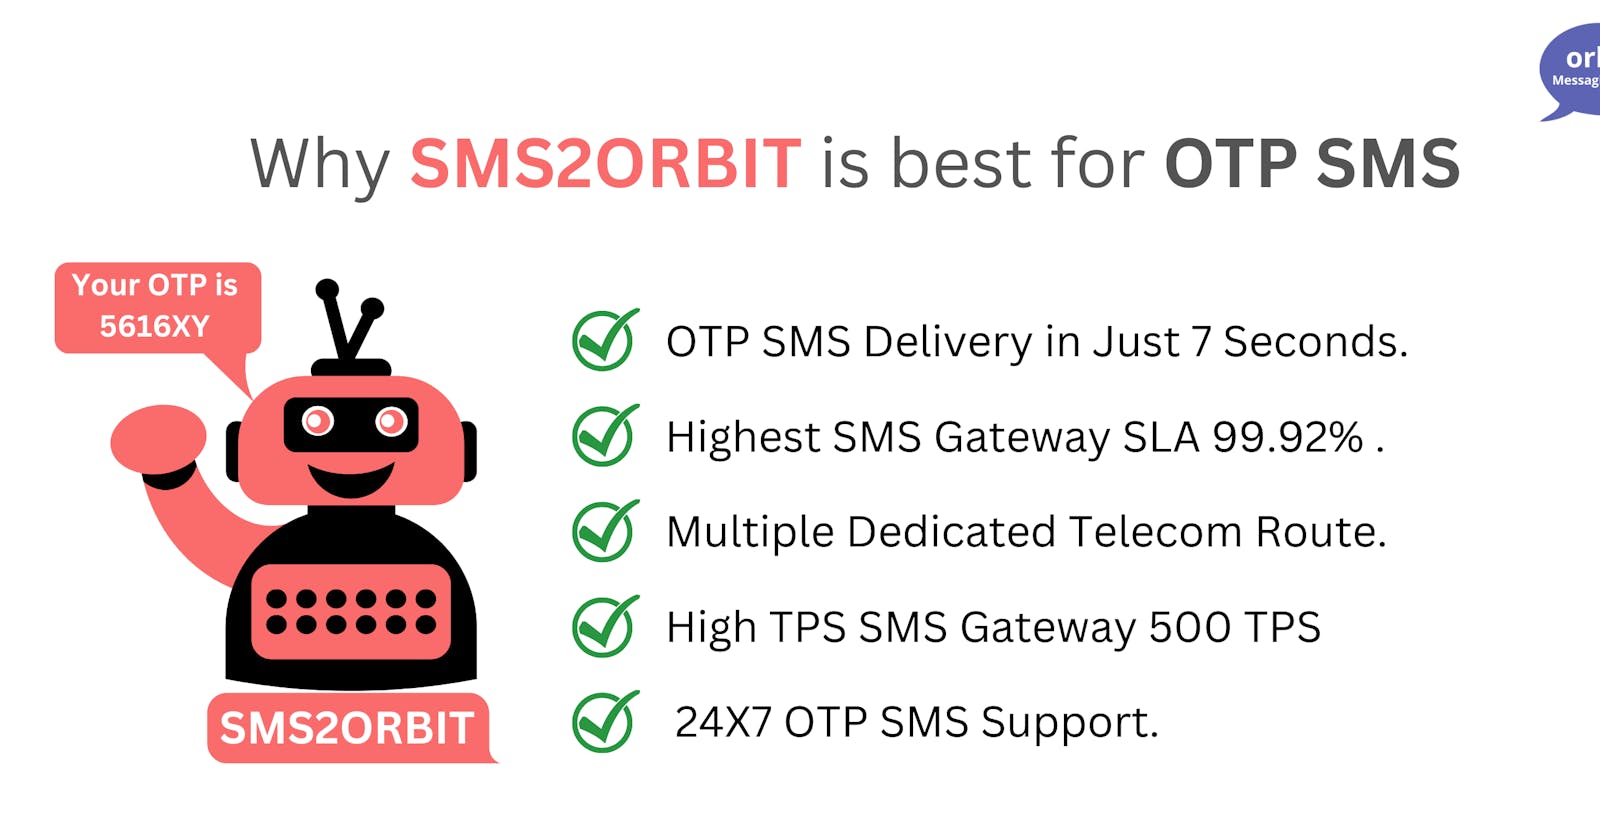 Sms2orbit Specializes In Providing Secure And Reliable Otp Sms Services.